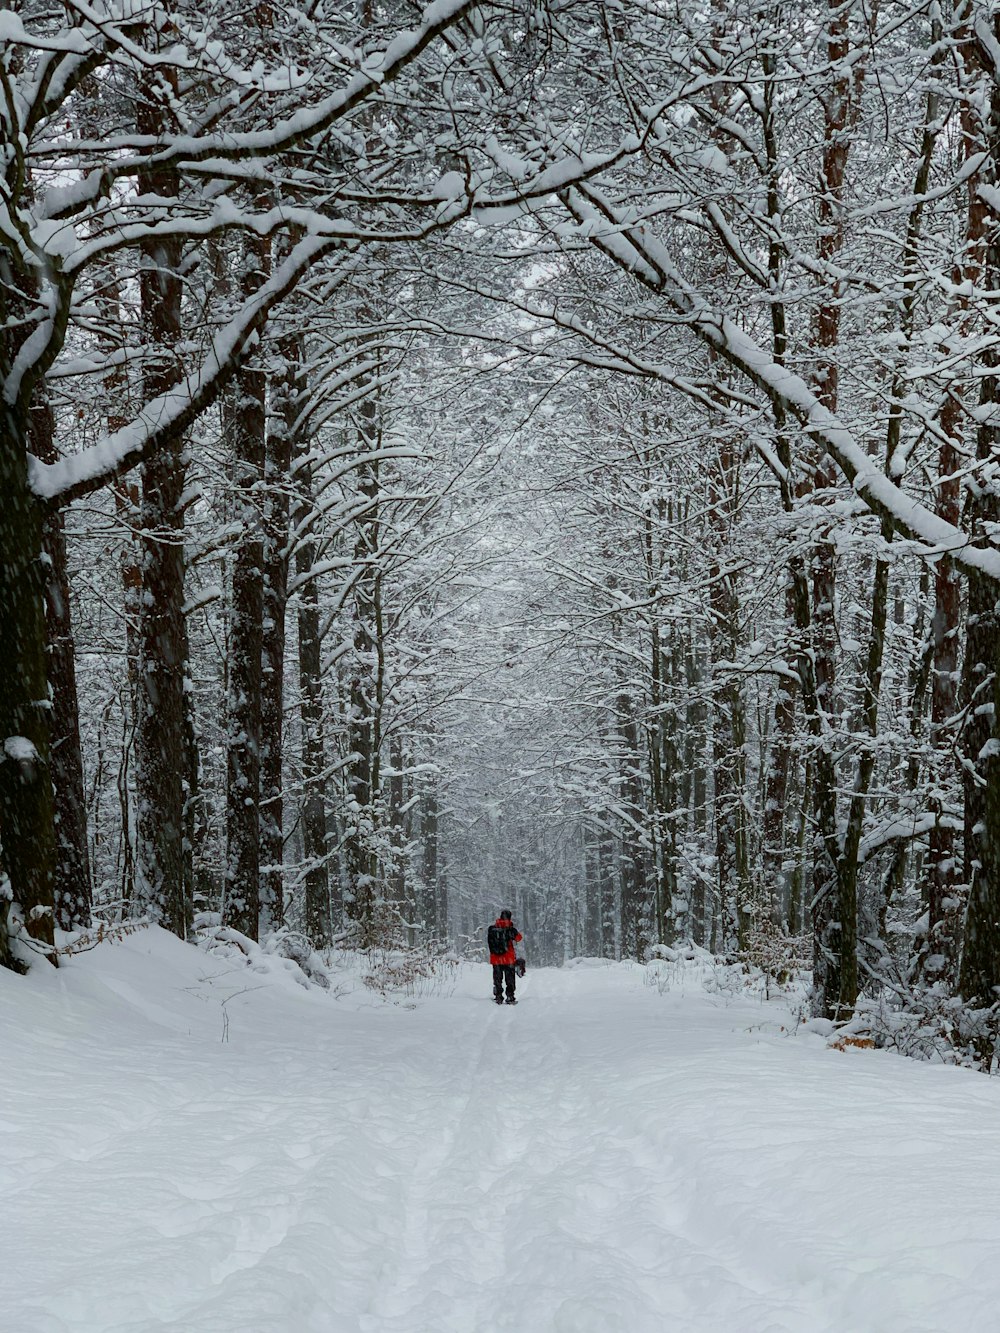 person in red jacket and black pants walking on snow covered ground between bare trees during